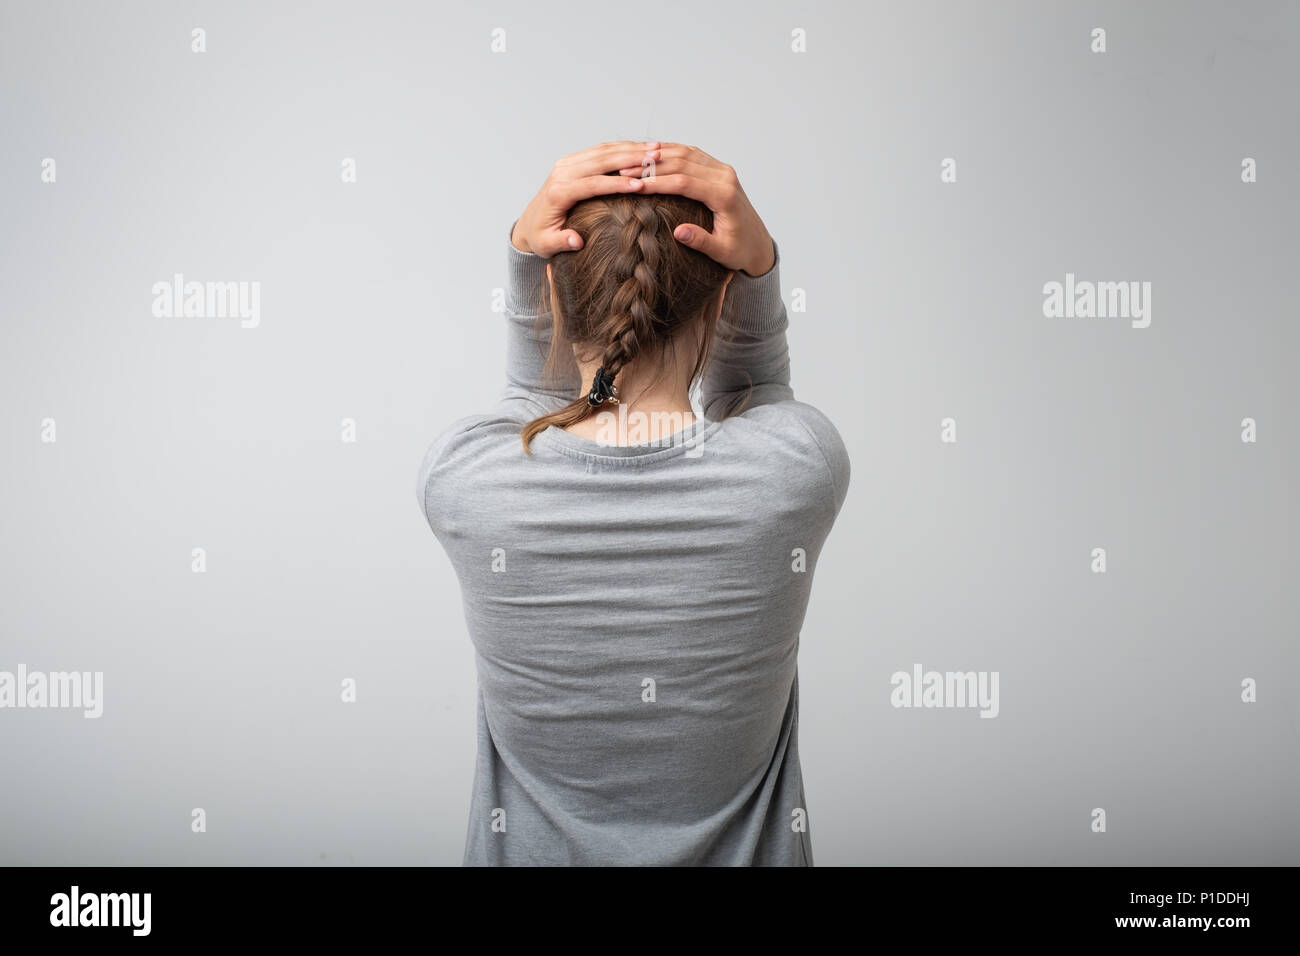 Crying standing young woman, back view Stock Photo